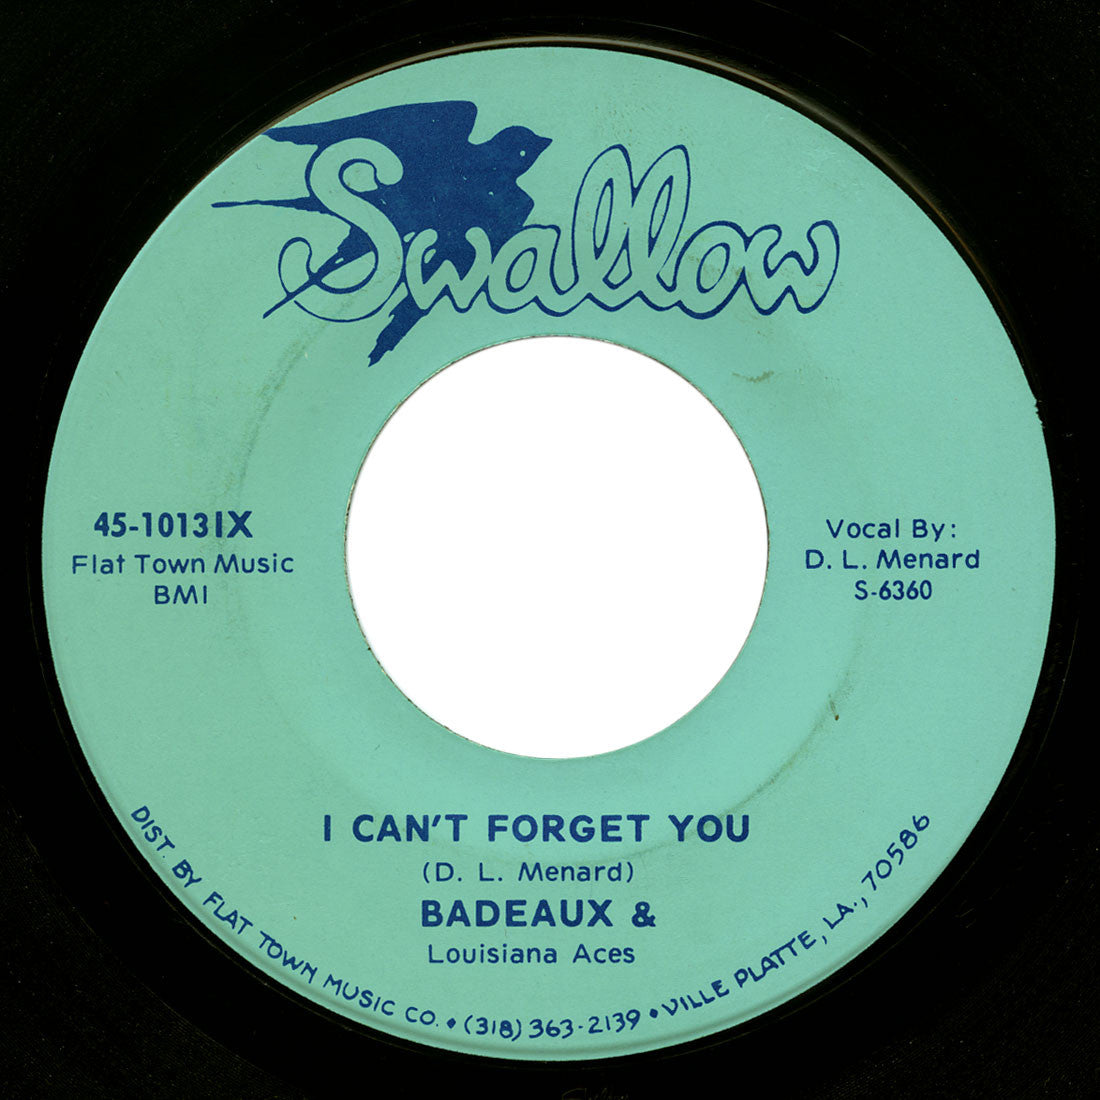 Badeaux & Louisiana Aces – I Can’t Forget You – Swallow